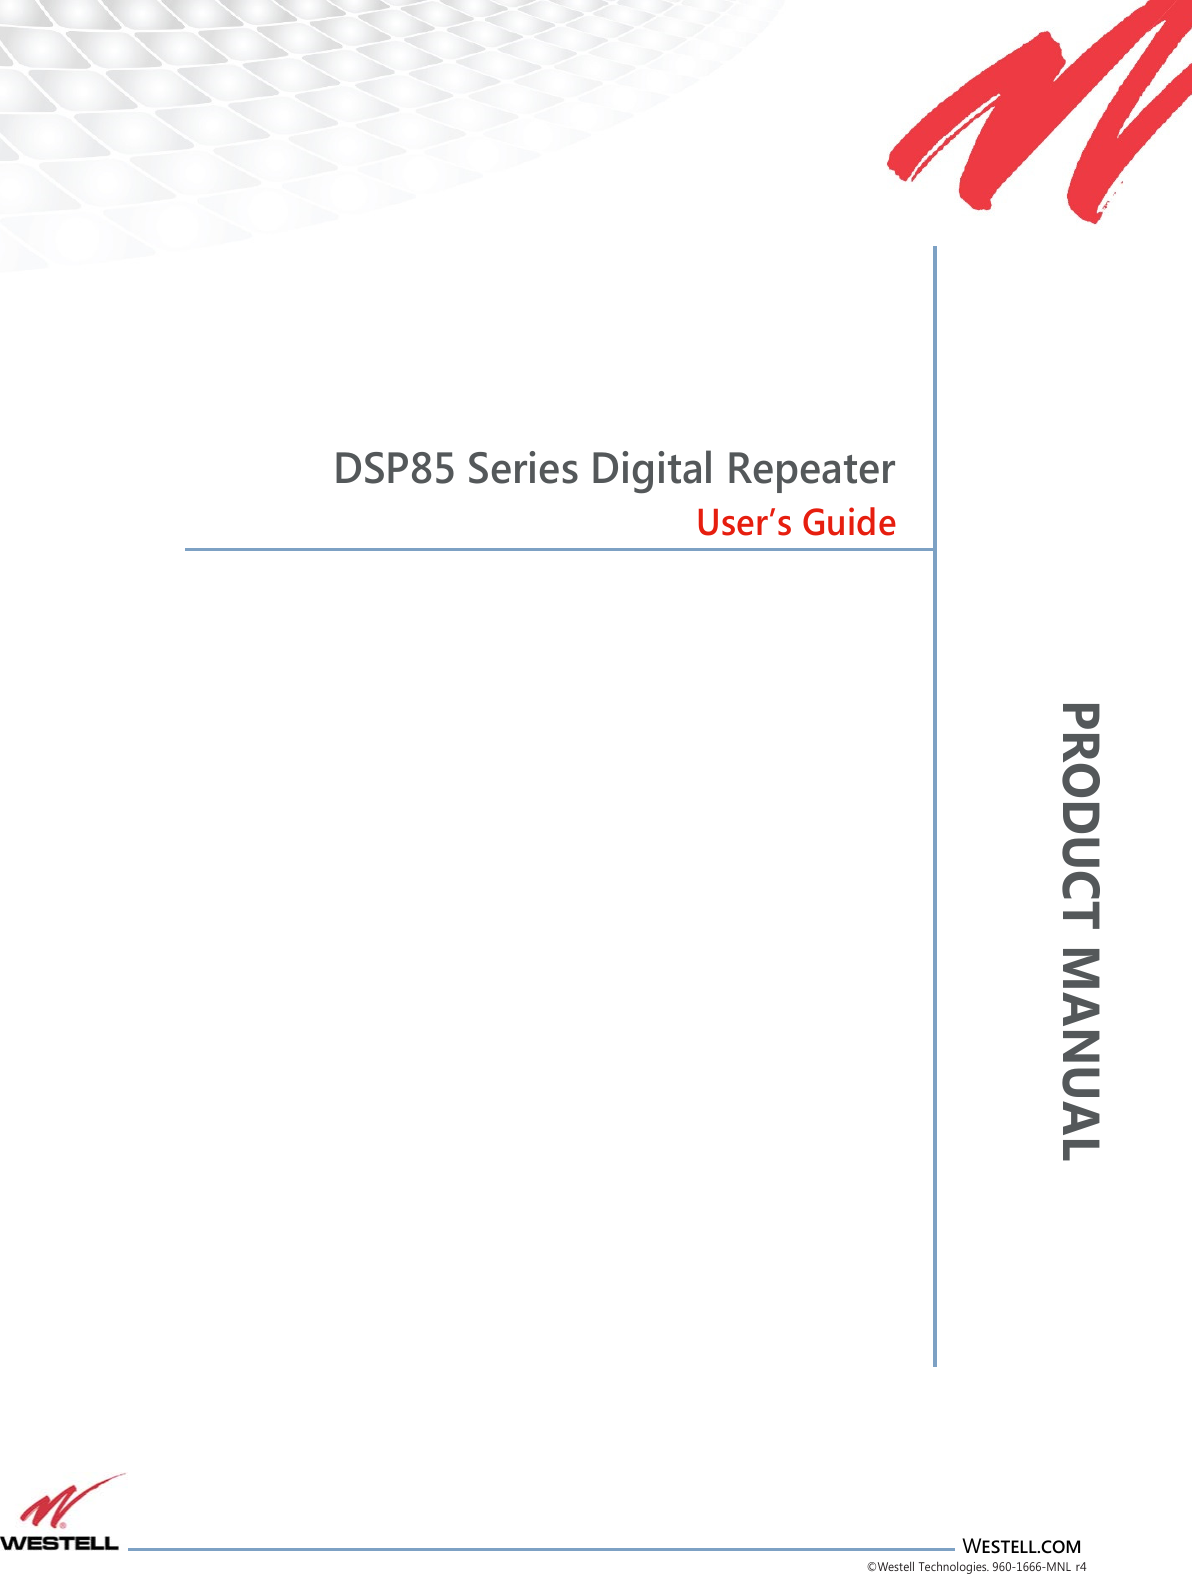 PRODUCT MANUAL                       WESTELL.COM ©Westell Technologies. 960-1666-MNL r4           DSP85 Series Digital Repeater User’s Guide                                         